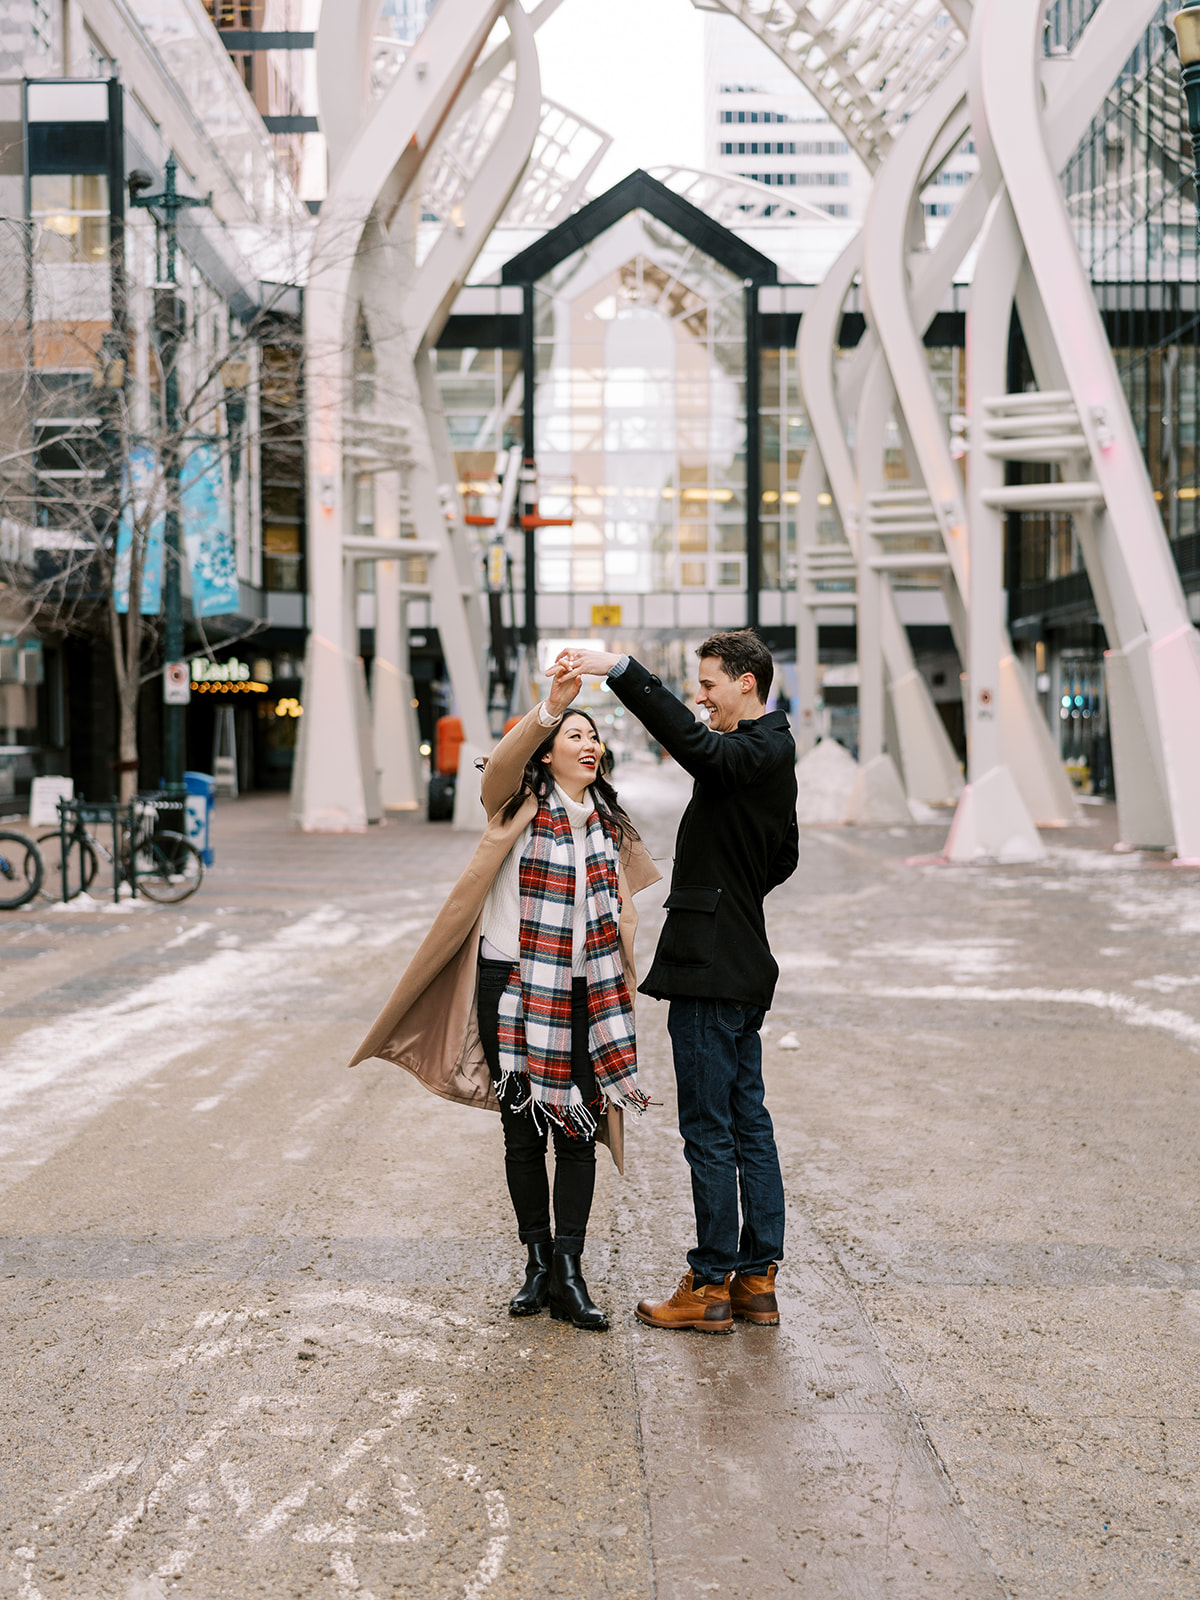 Cute Couples Engagement Session for Winter and Christmas in Downtown Calgary